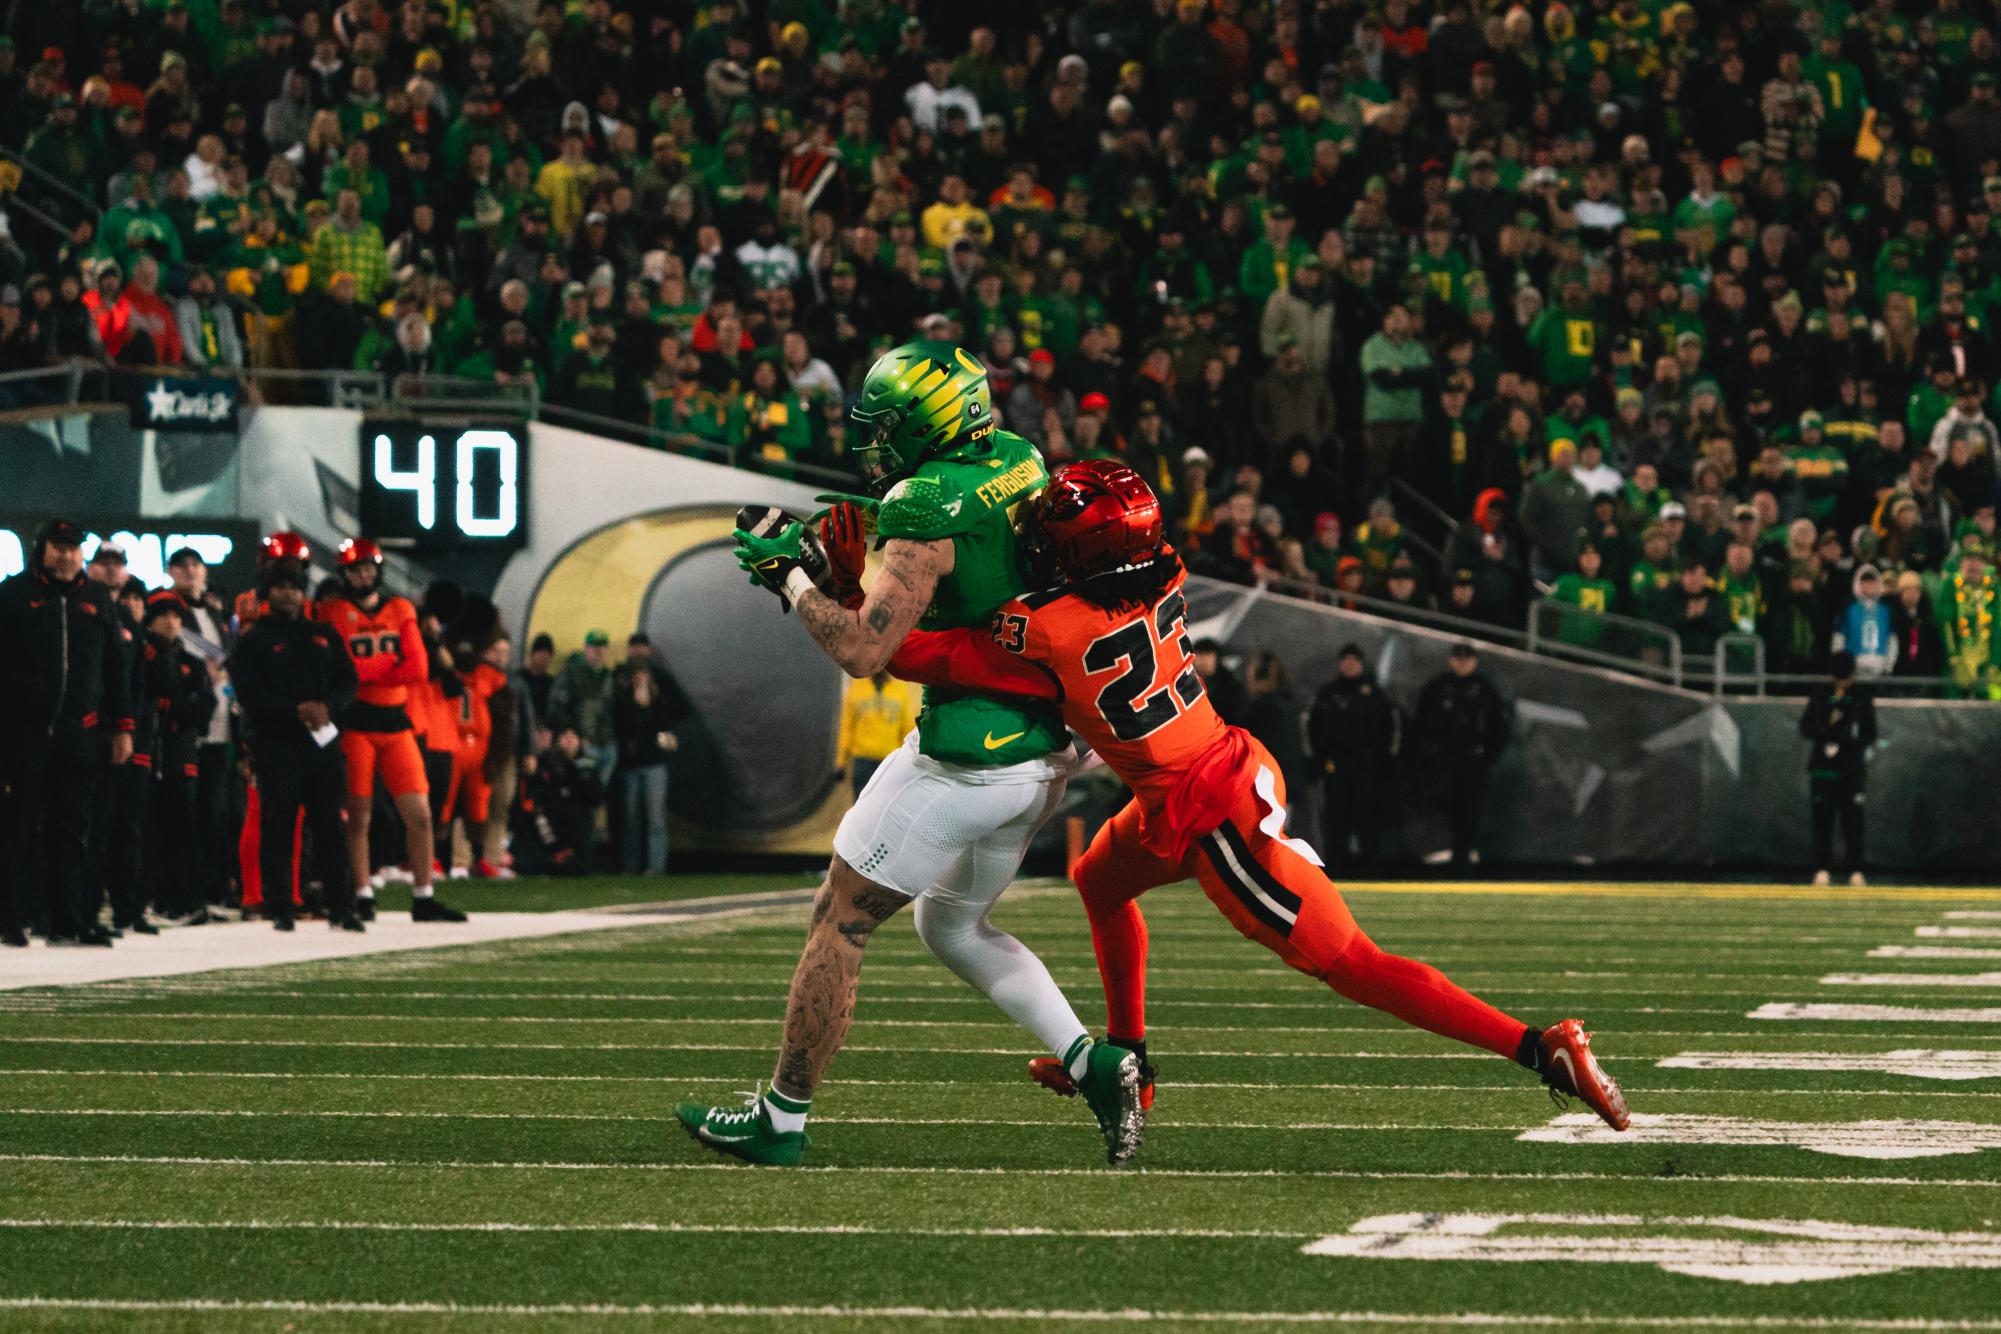 Jermod McCoy (#23) wraps up University of Oregon tight end Terrance Ferguson (#3) in the 127th Rivalry Game. The game concluded with a Beaver defeat, 7-31. 